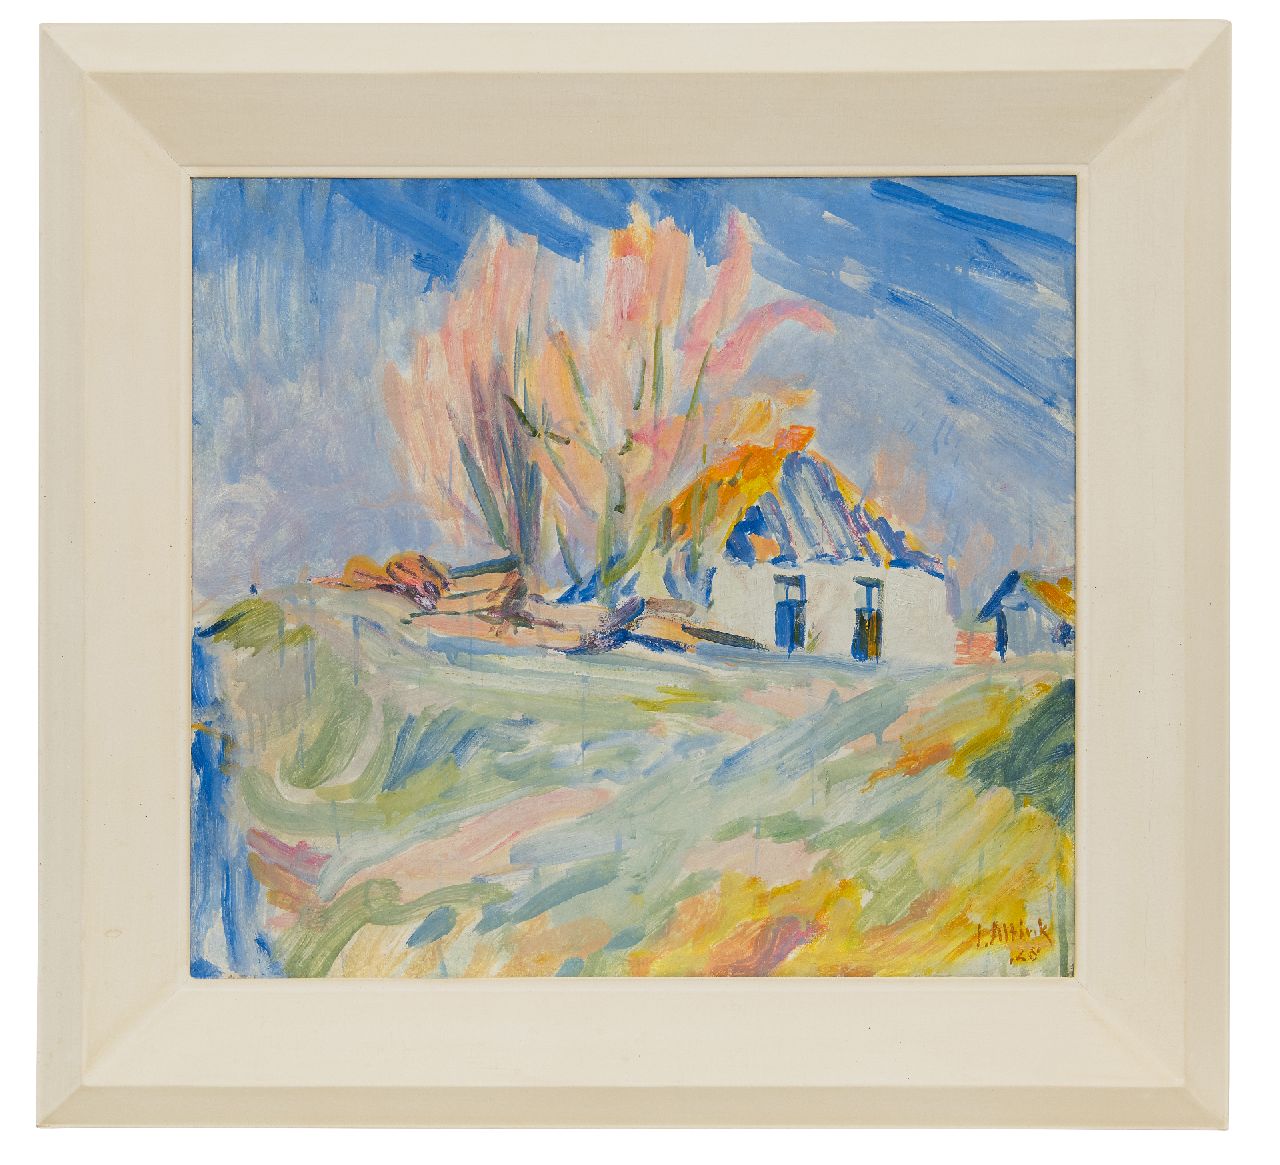 Altink J.  | Jan Altink | Paintings offered for sale | The farm 'Blauwborgje' in Groningen, oil on canvas 55.0 x 60.4 cm, signed l.r. and dated '28